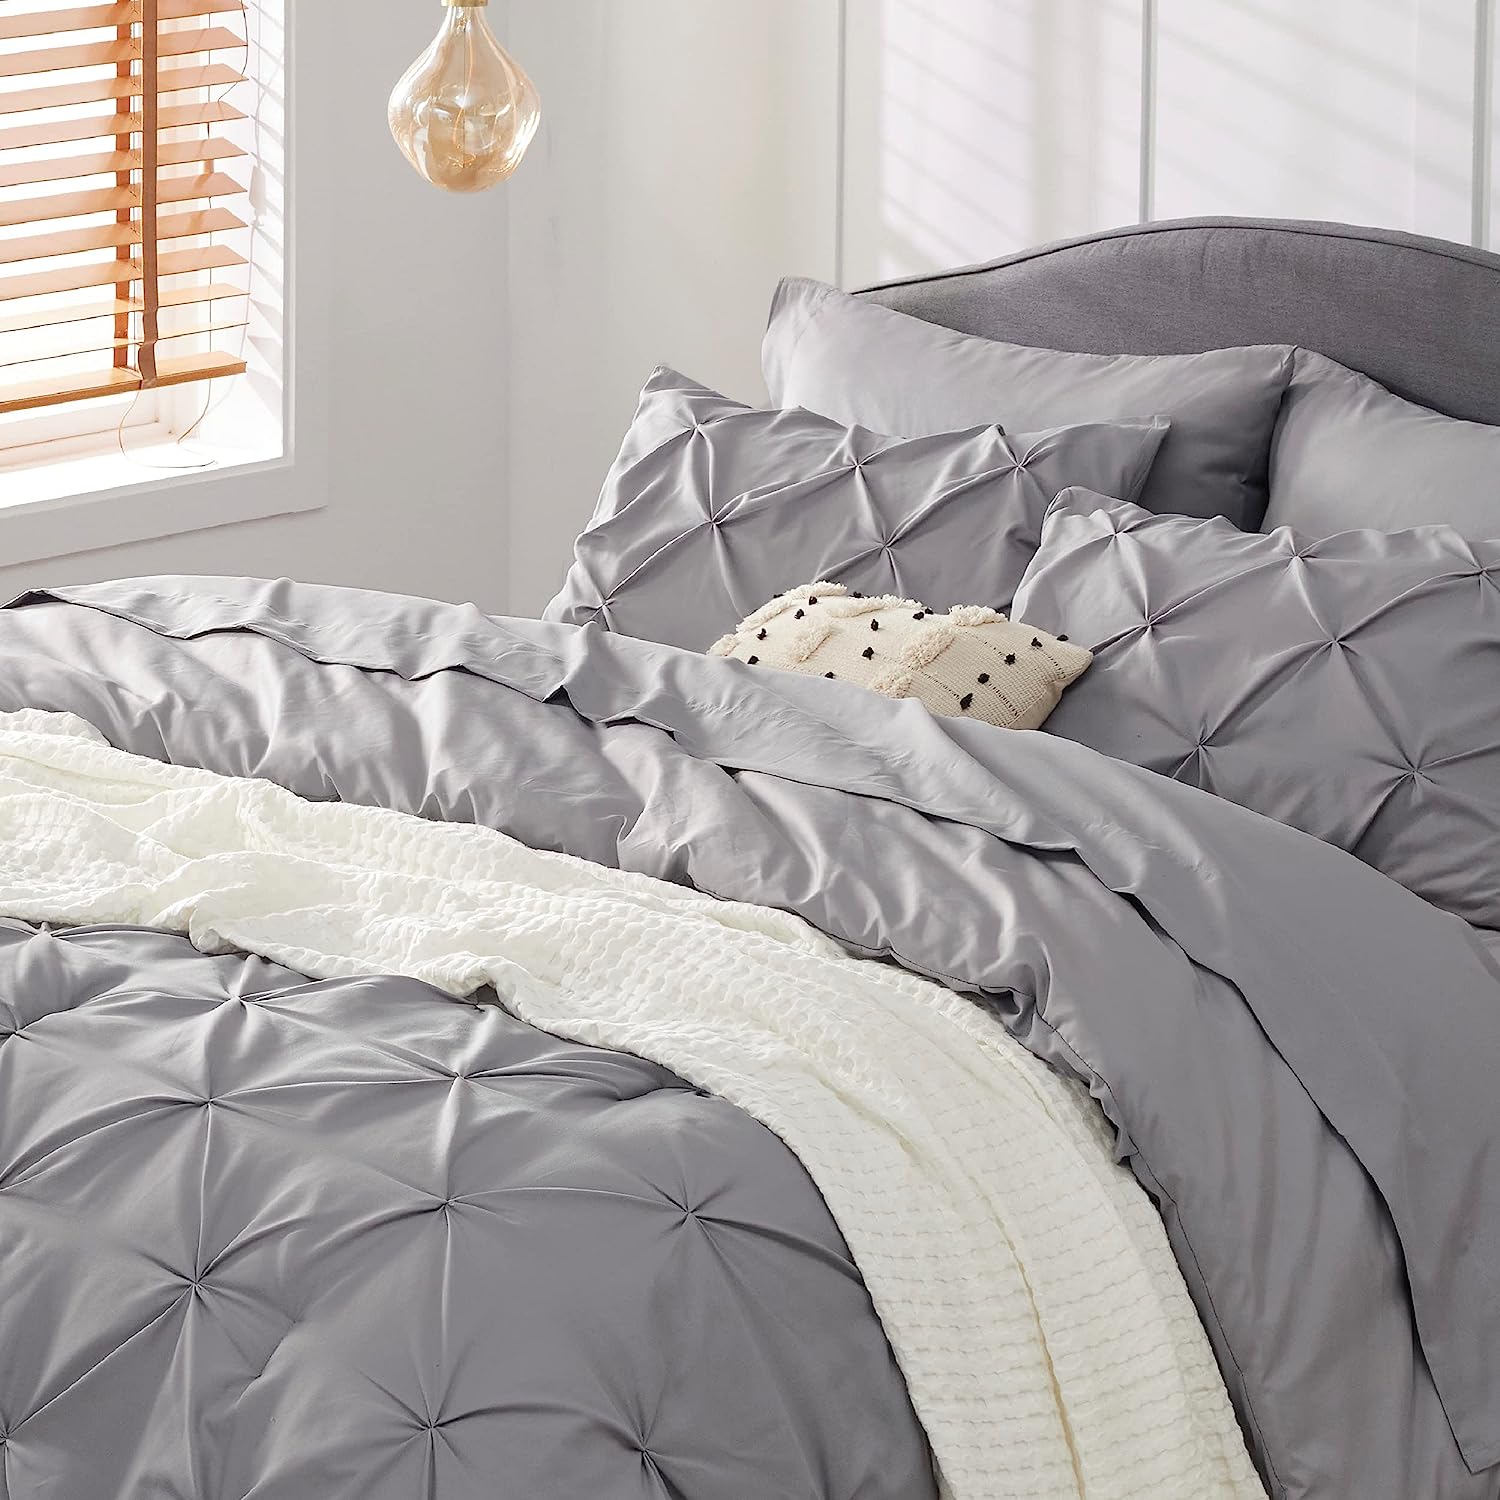 https://bigbigmart.com/wp-content/uploads/2023/09/Bedsure-Queen-Comforter-Set-7-Pieces-Comforters-Queen-Size-Grey-Pintuck-Bedding-Sets-Queen-for-All-Season-Bed-in-a-Bag-with-Flat-Sheet-and-Fitted-Sheet-Pillowcases-Shams5.jpg